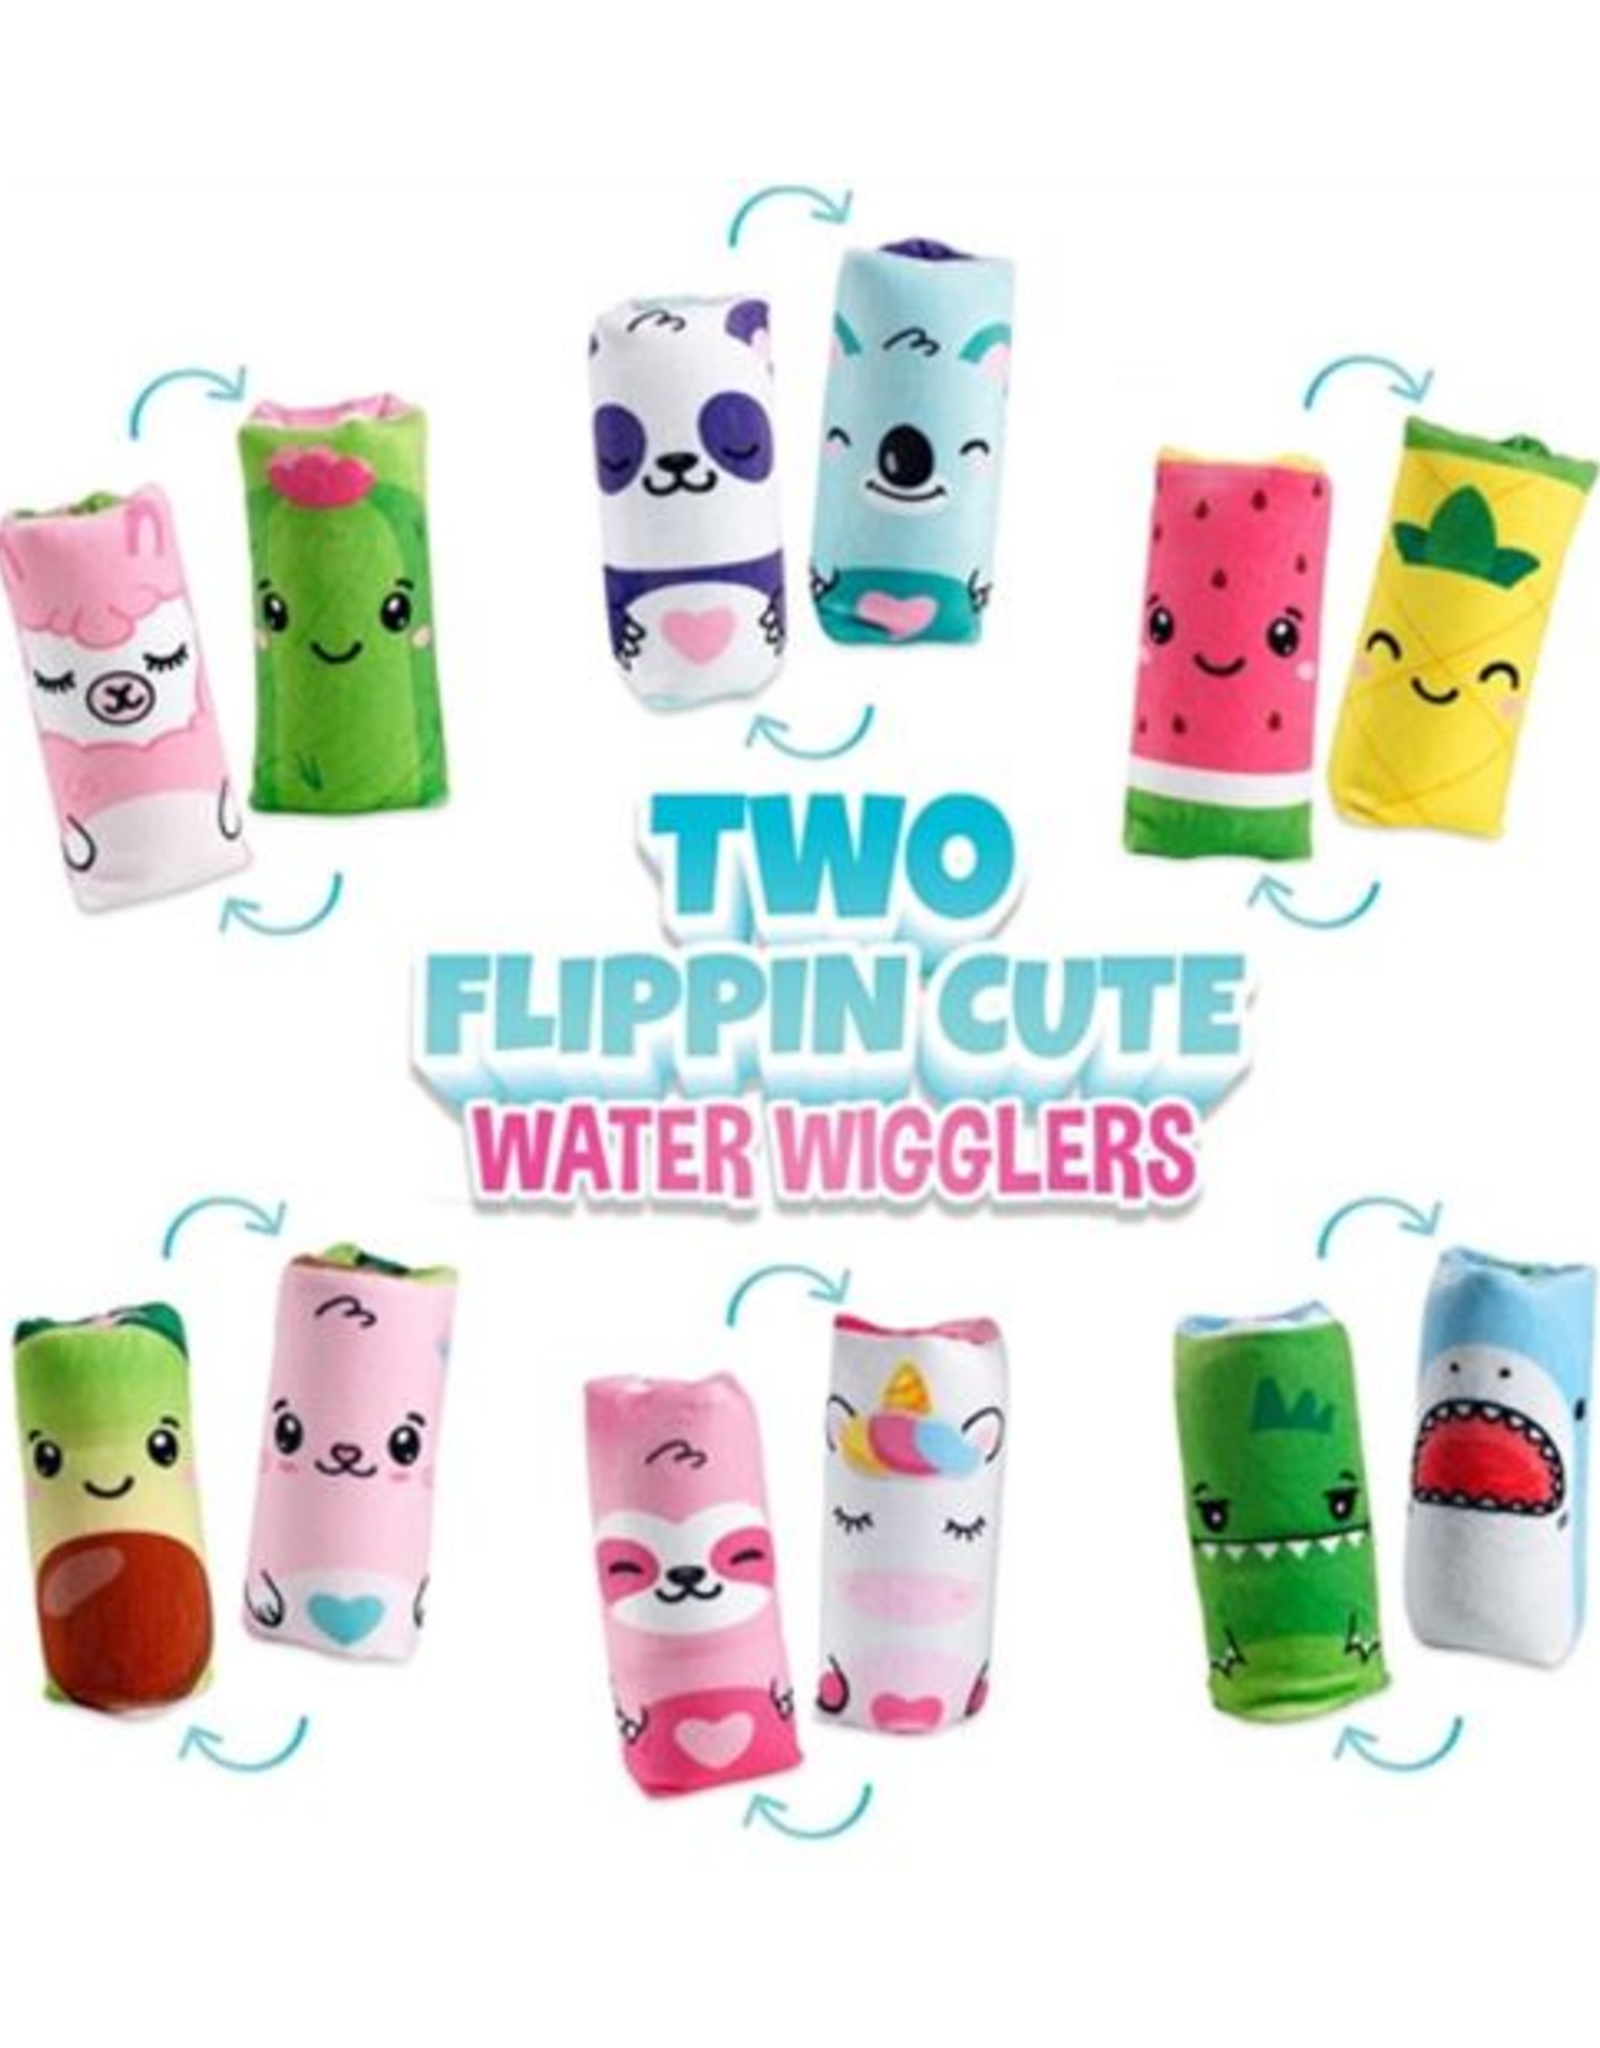 Two Flipping Cute Water Wigglers